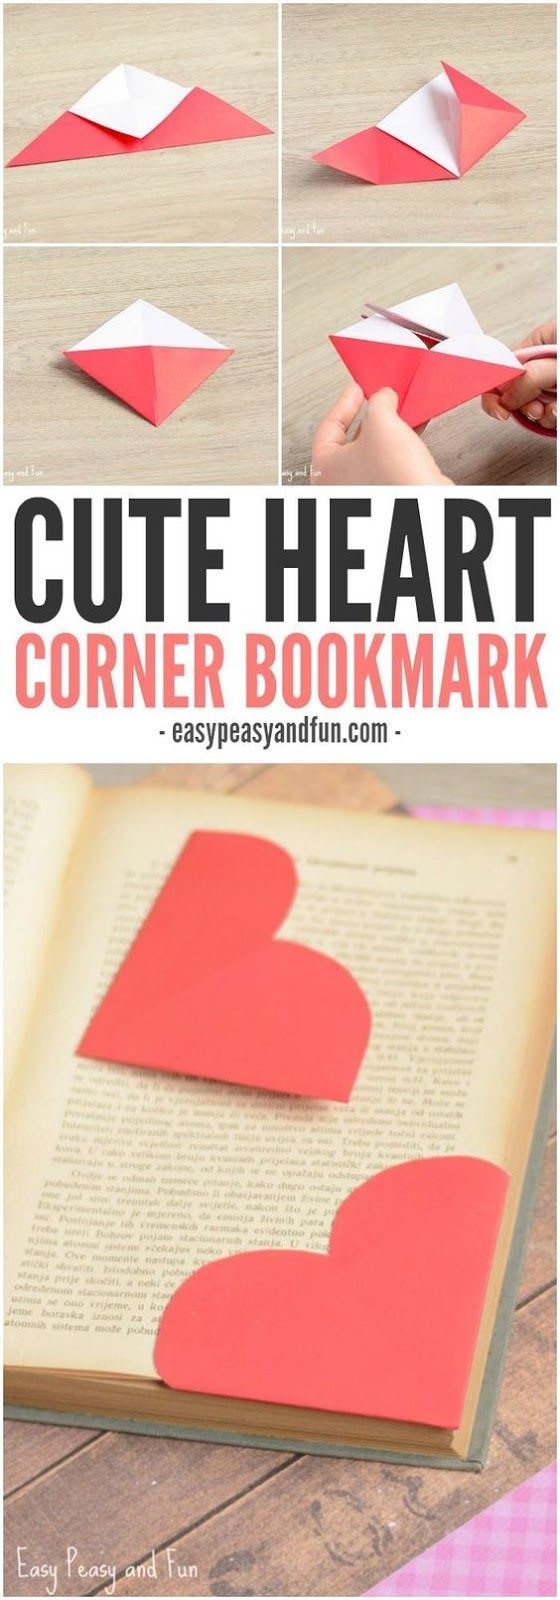 Heart Corner Bookmarks -   22 cheap crafts for the home
 ideas